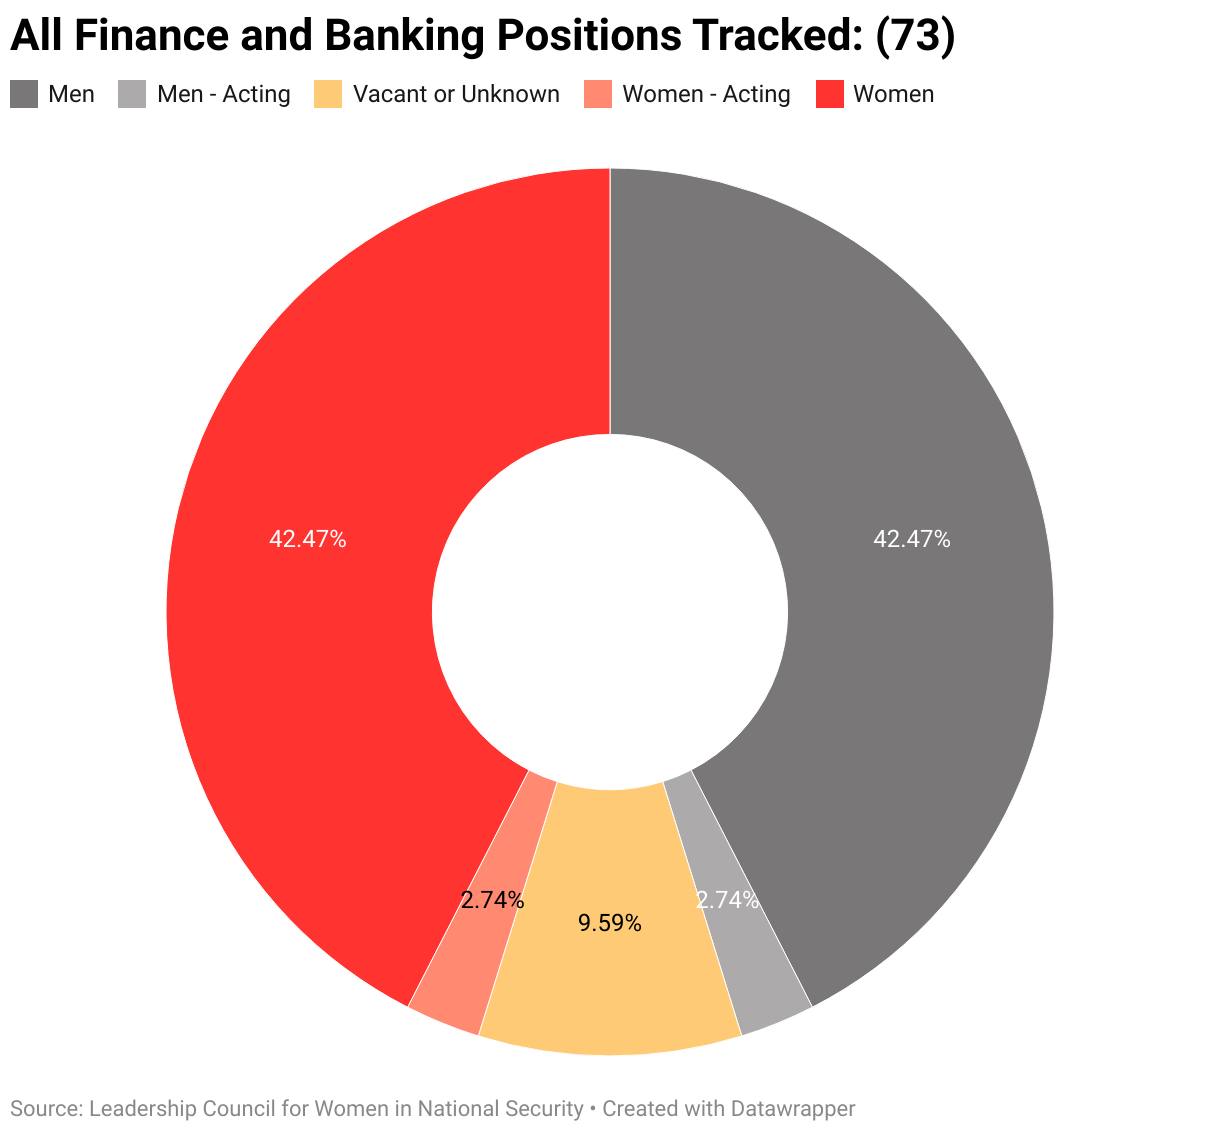 The gendered breakdown of all finance and banking positions tracked by LCWINS (73).